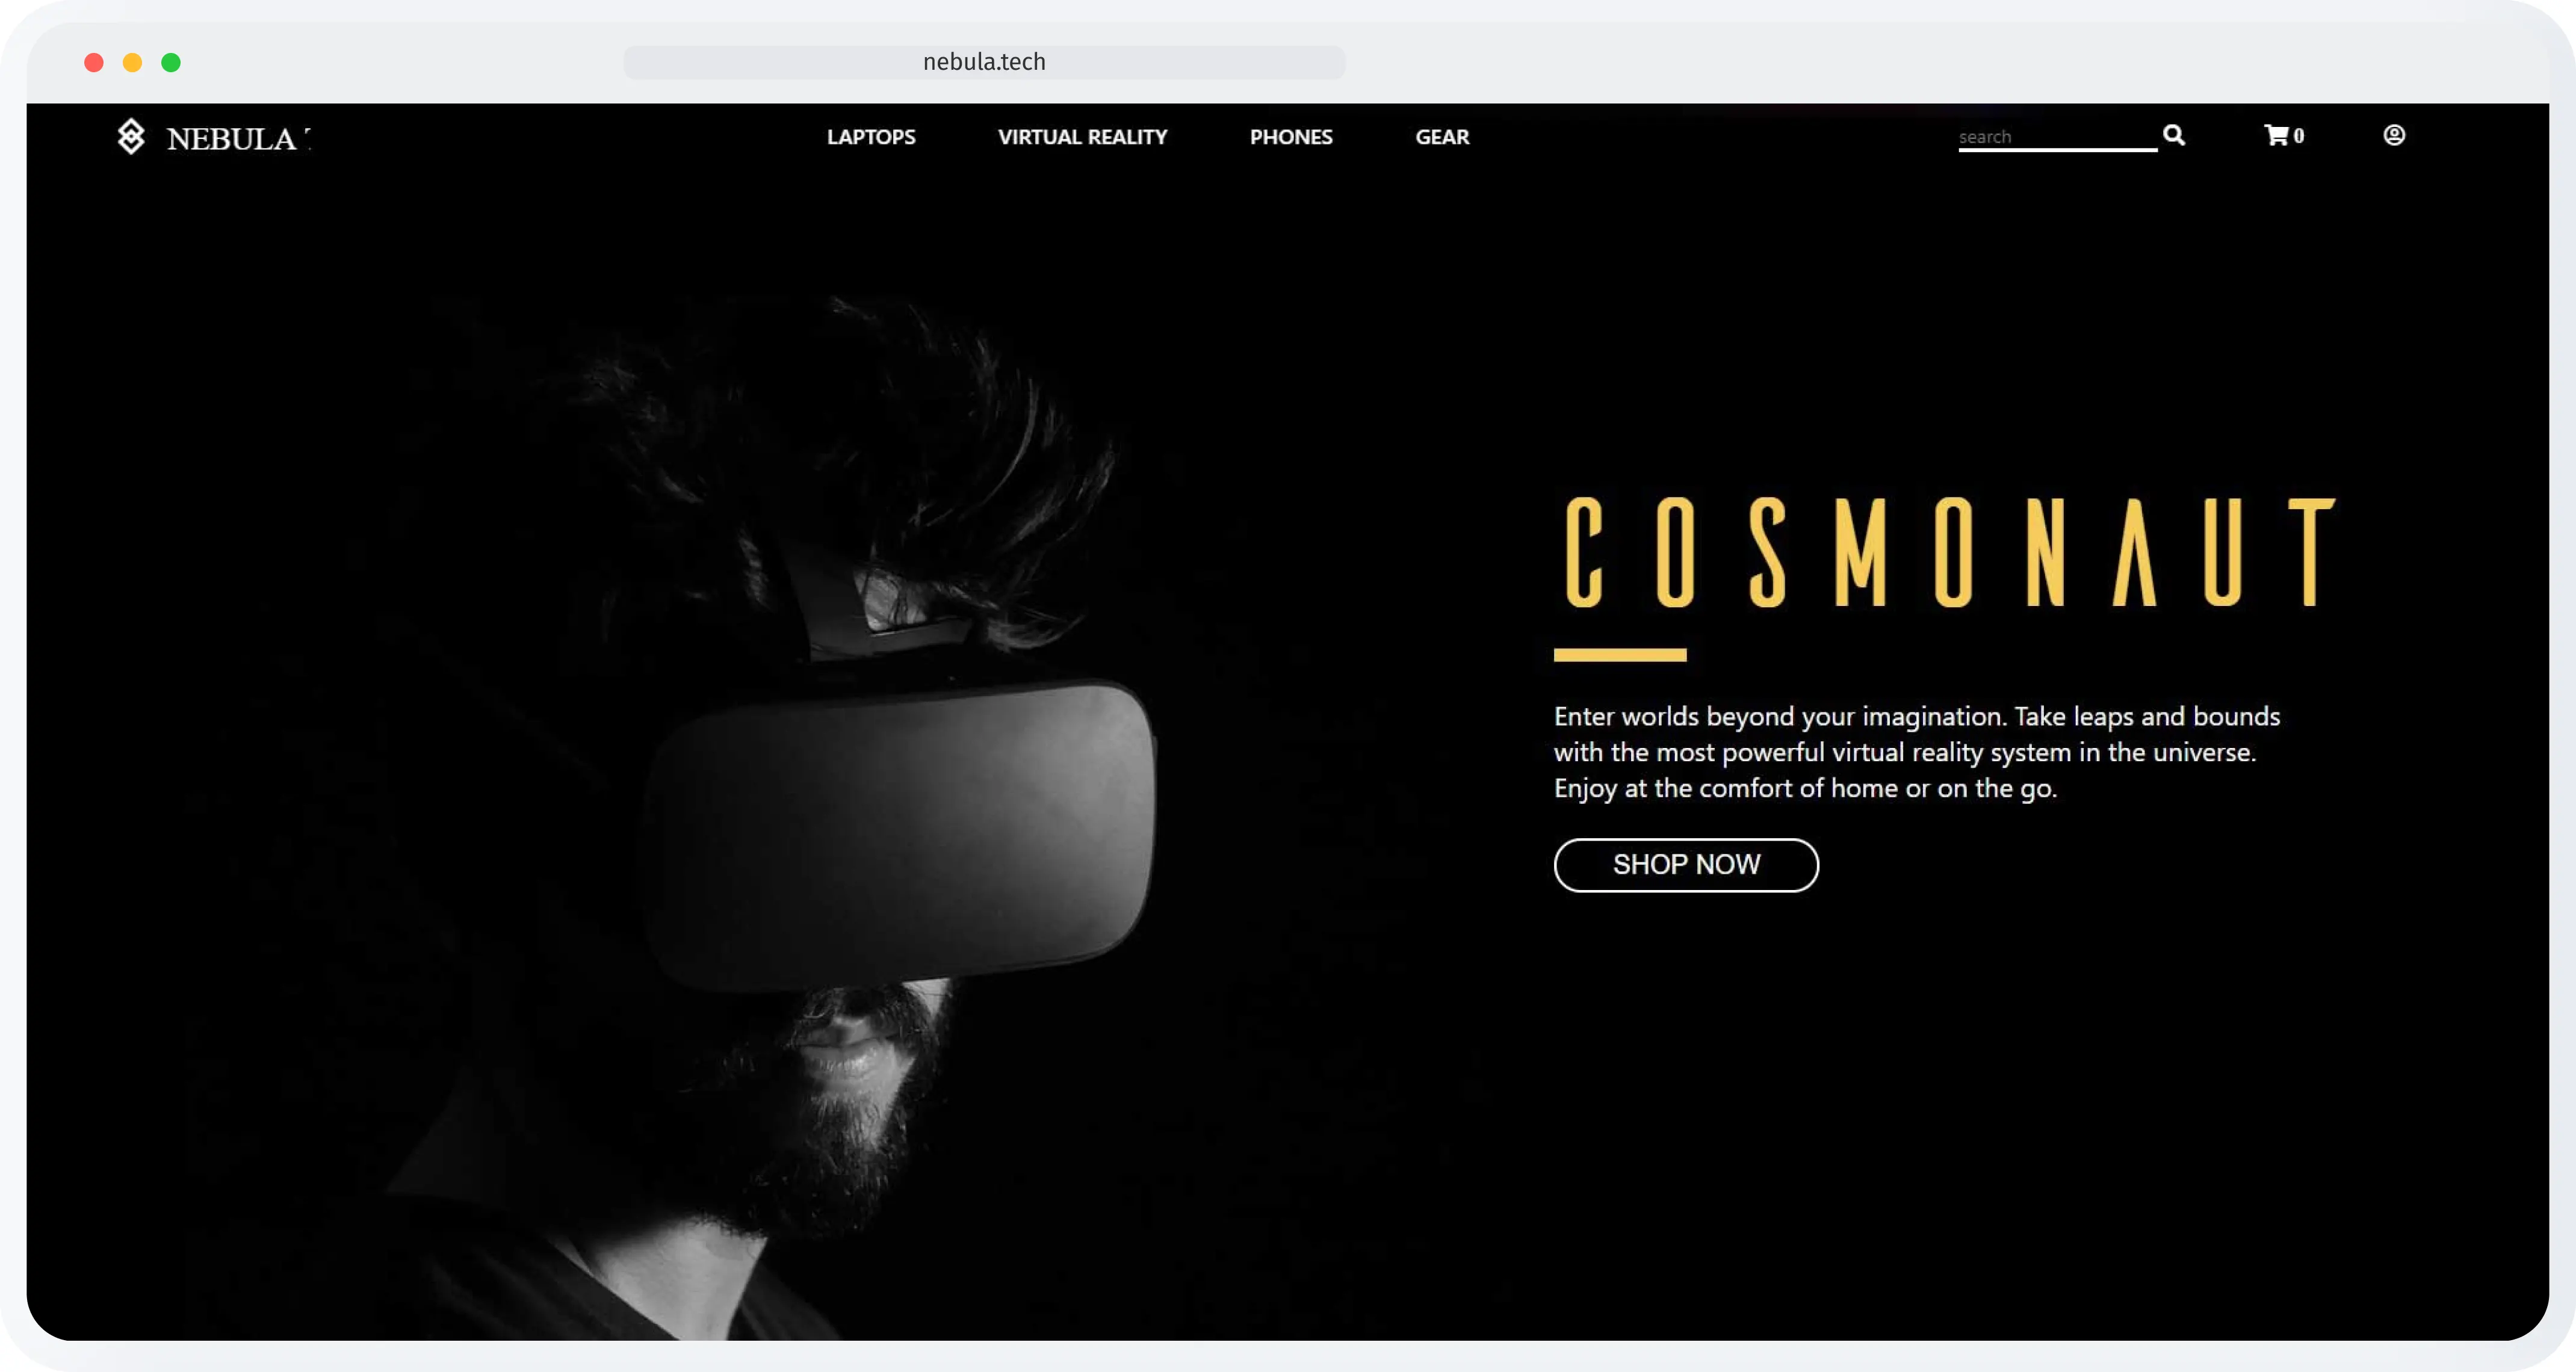 Screenshot of the featured VR 'Cosmonaut' device